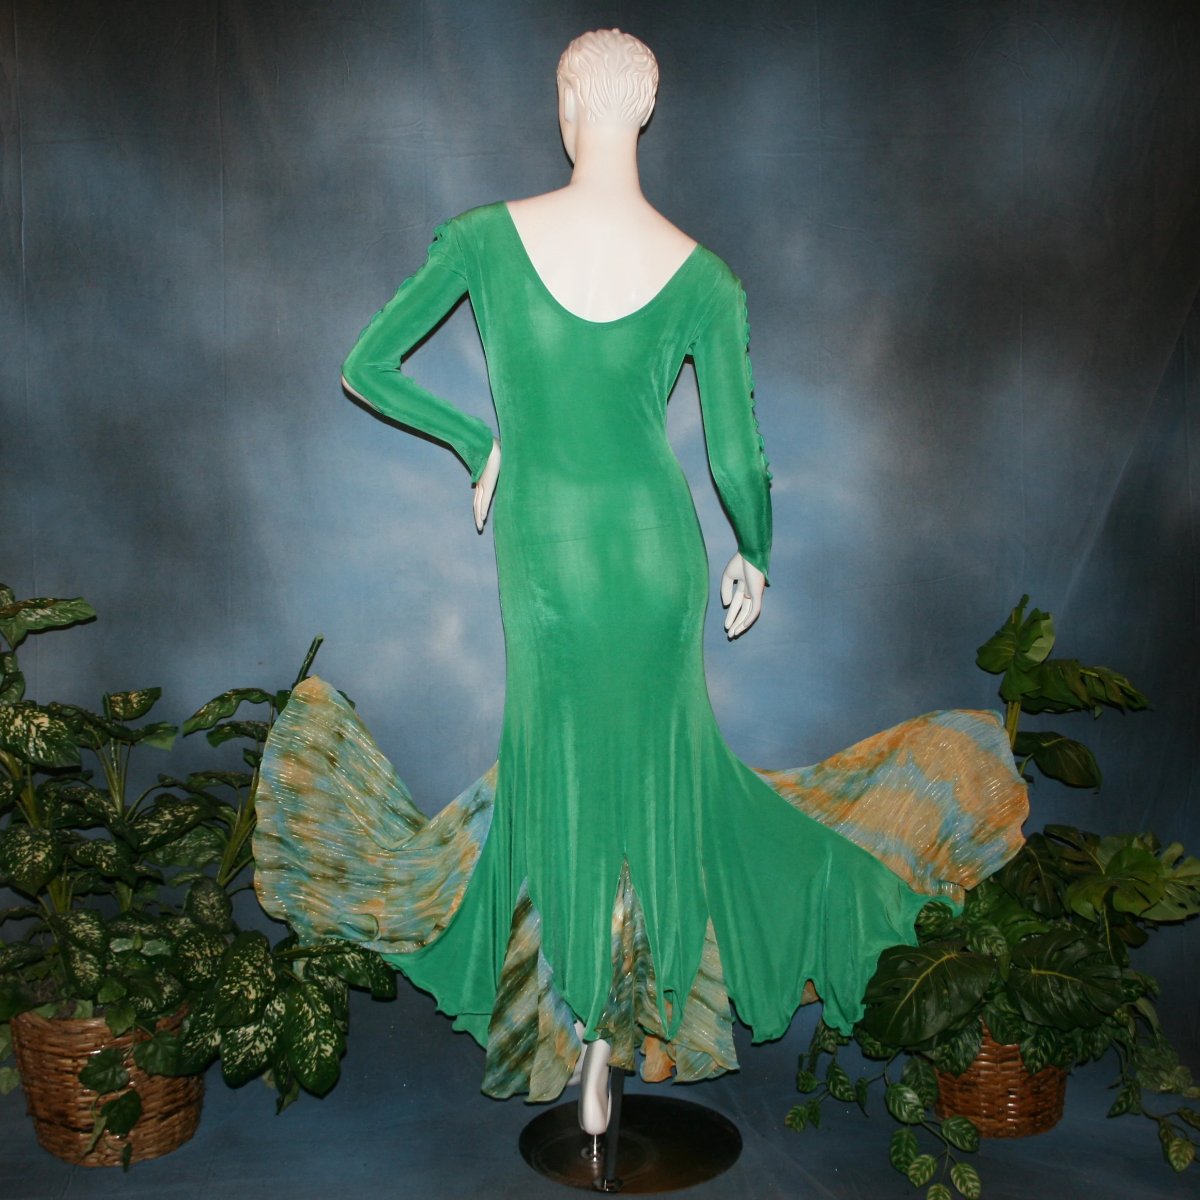 back view of Gorgeous green ballroom dress created in luxurious solid slinky fabric with printed chiffon of greens, with gold accents insets. Very full around bottom...can be a beginner ballroom dancer smooth or standard dress.